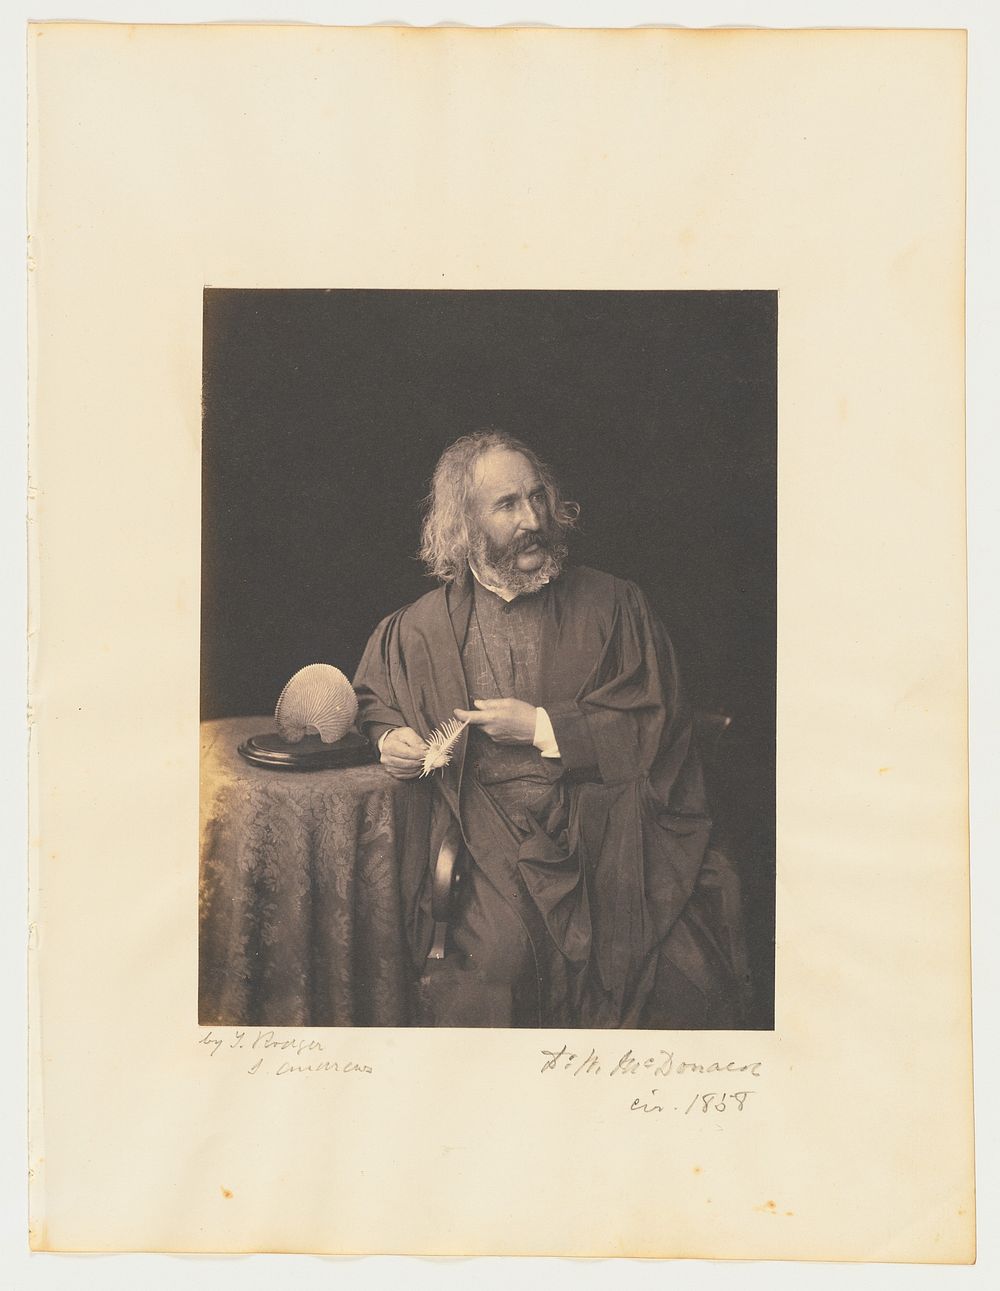 Dr. W. McDonald by Thomas Rodger